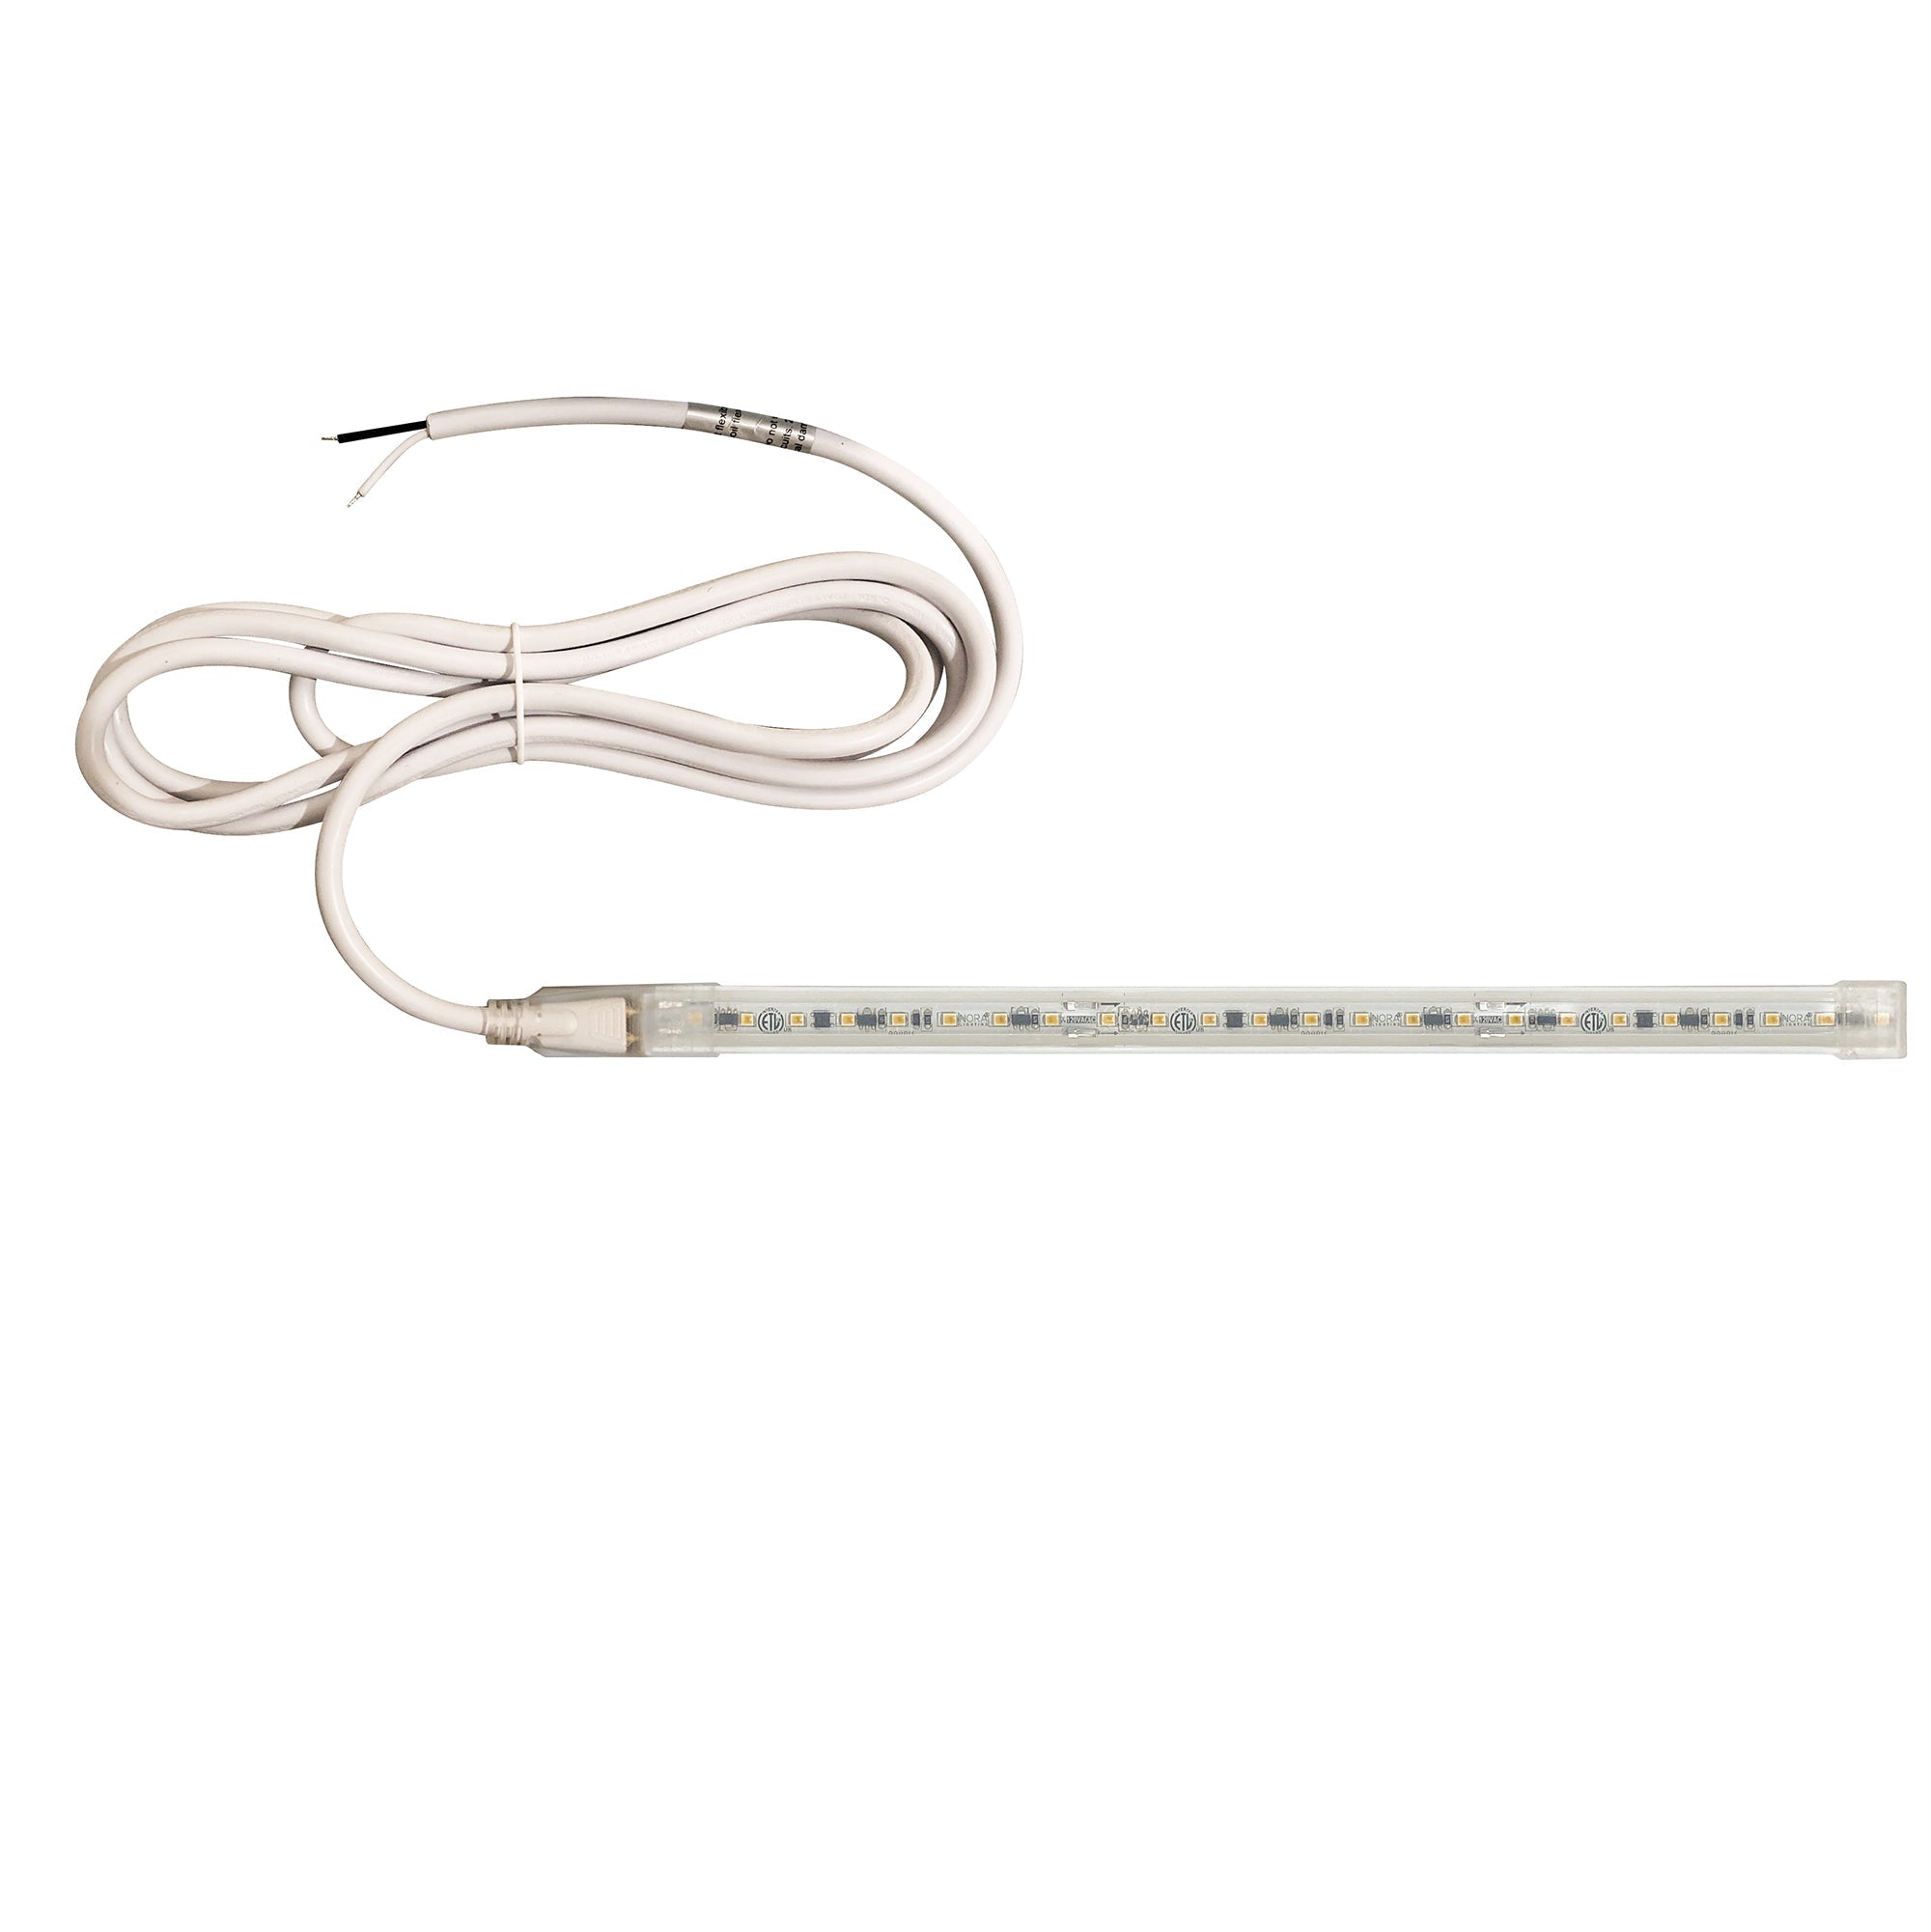 Nora Lighting NUTP13-W10-12-940/HW - Accent / Undercabinet - Custom Cut 10-ft 120V Continuous LED Tape Light, 330lm / 3.6W per foot, 4000K, w/ Mounting Clips and 8' Hardwired Power Cord